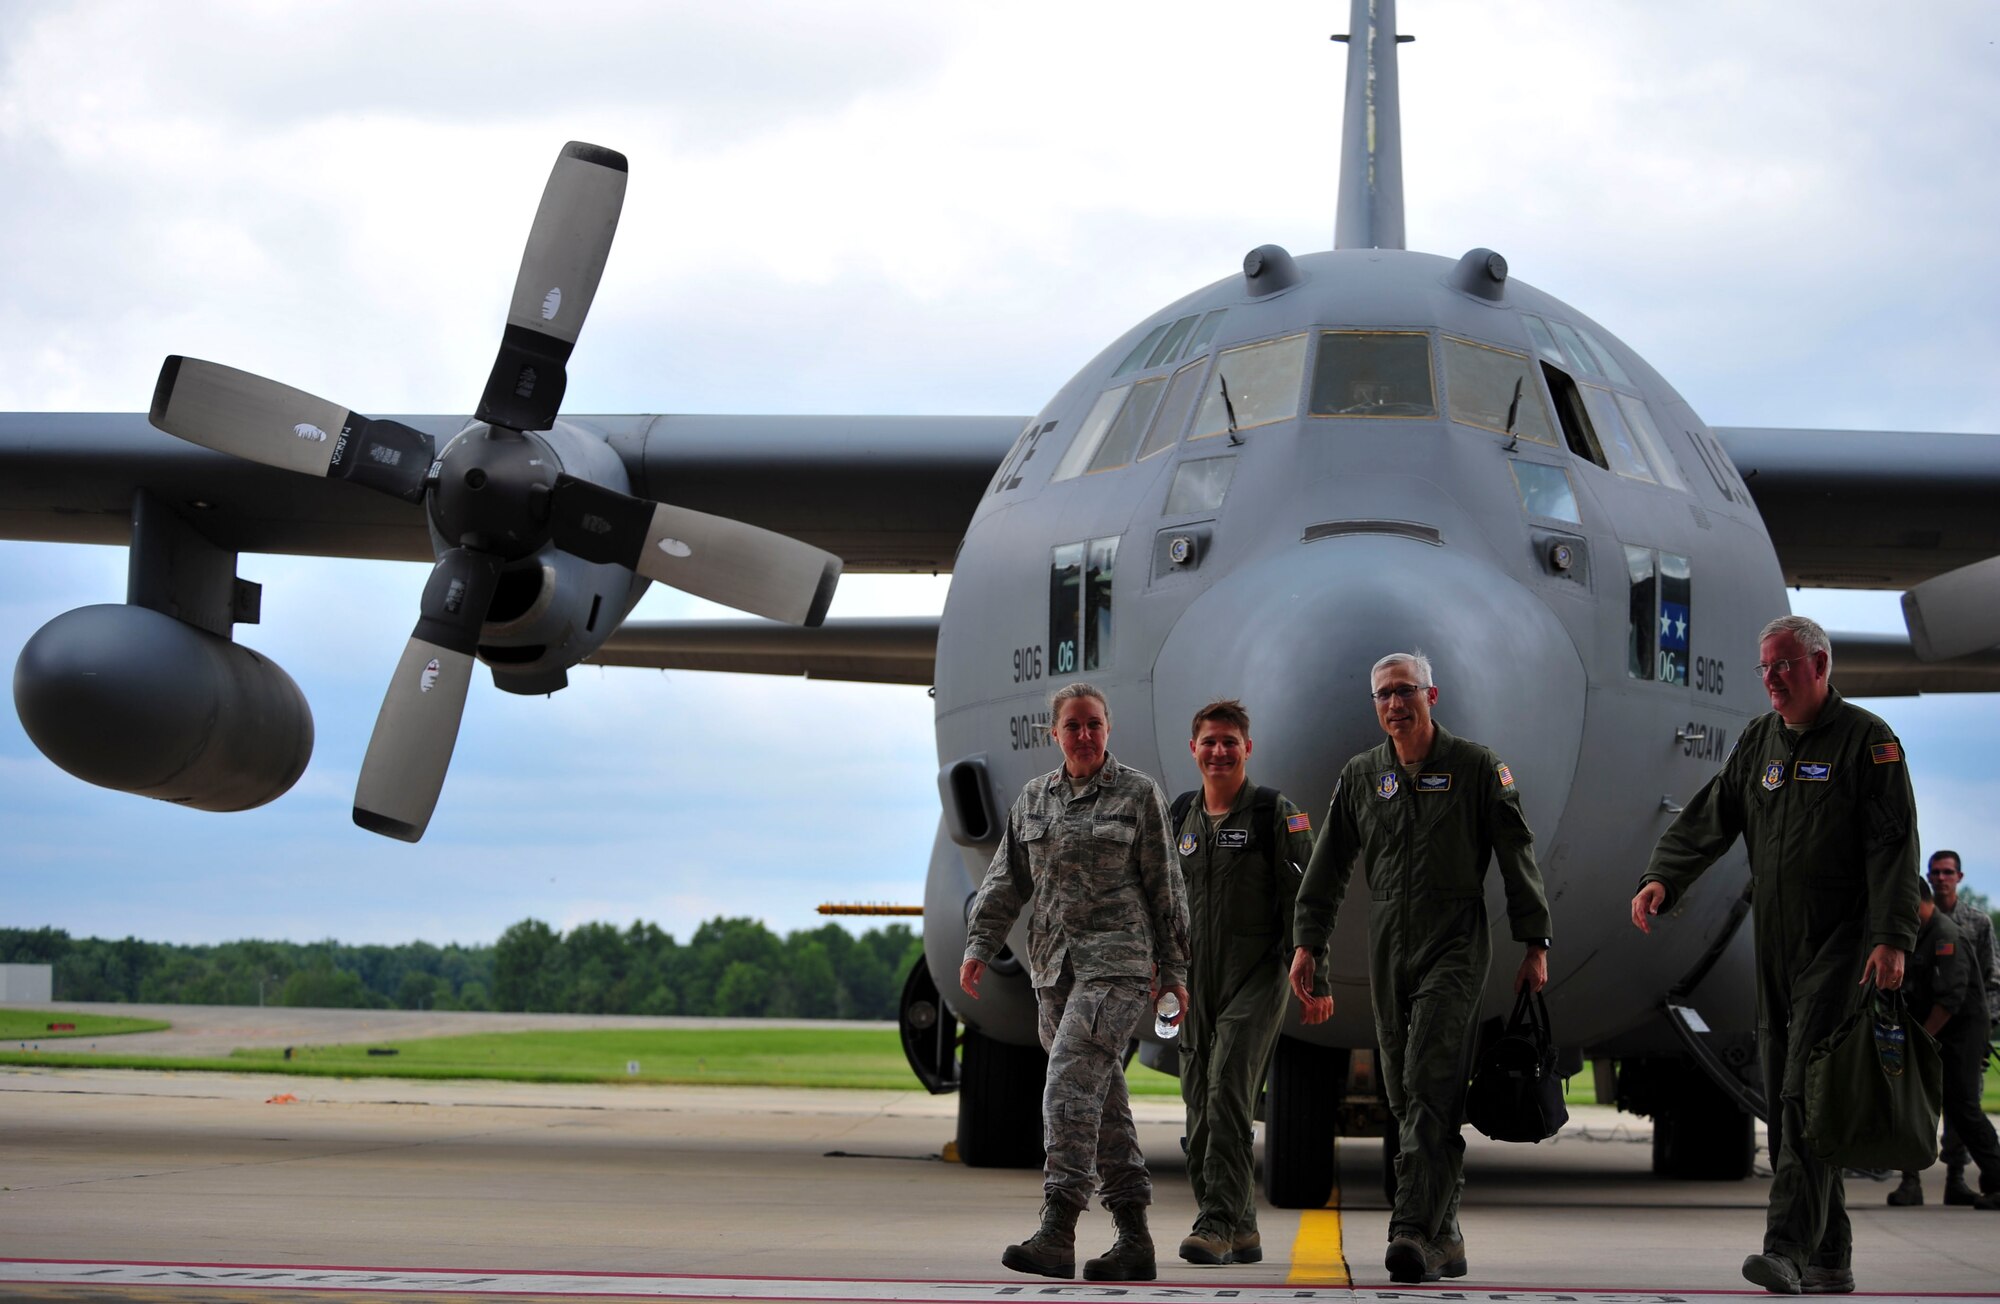 Maj. Gen. Craig L. La Fave, commander of the 22nd Air Force, disembarks a 910th Airlift Wing C-130H Hercules in front of a C-130 aircraft hangar on Youngstown Air Reserve Station after taking part in an aerial spray demonstration flight on June 2. La Fave visited YARS from June 1 through 3 making his way around the station and receiving briefings from several of the 910th AW’s squadrons on how they provide a current, qualified, mission-ready force so the Air Force can fly, fight and win in air, space and cyberspace. (U.S. Air Force photo/Airman 1st Class Noah J. Tancer)